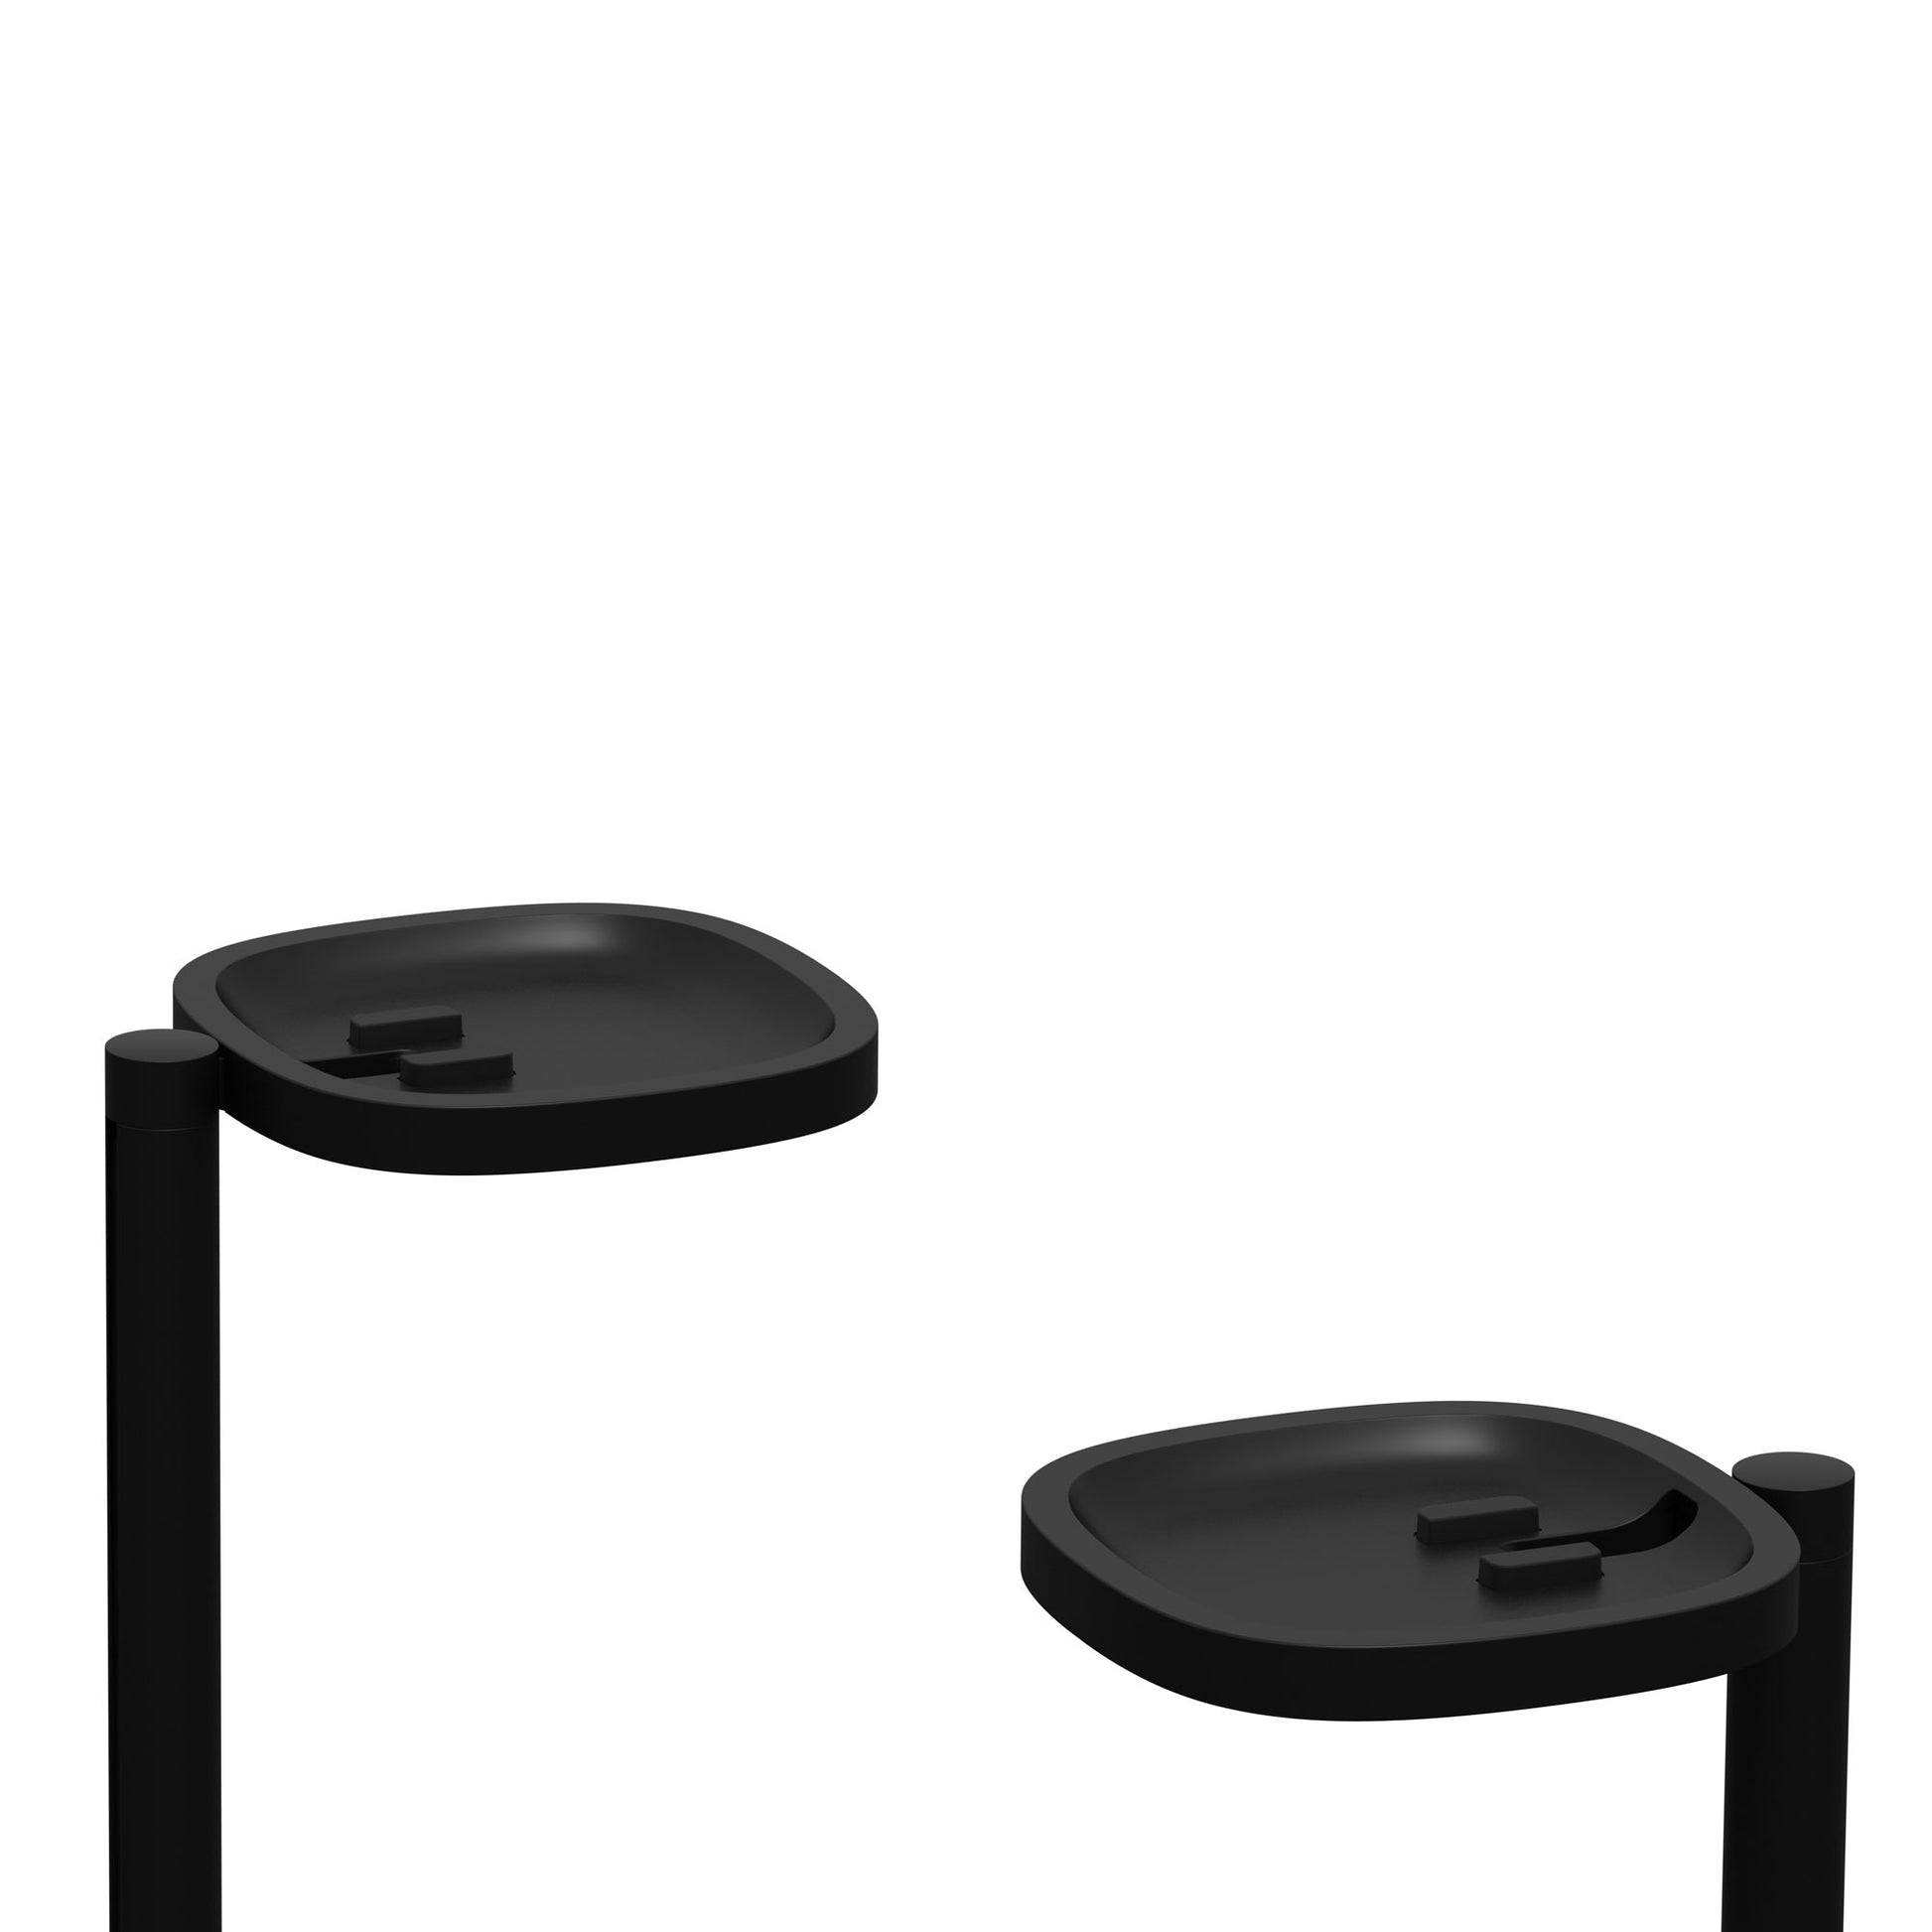 Sonos Stands - No speakers View